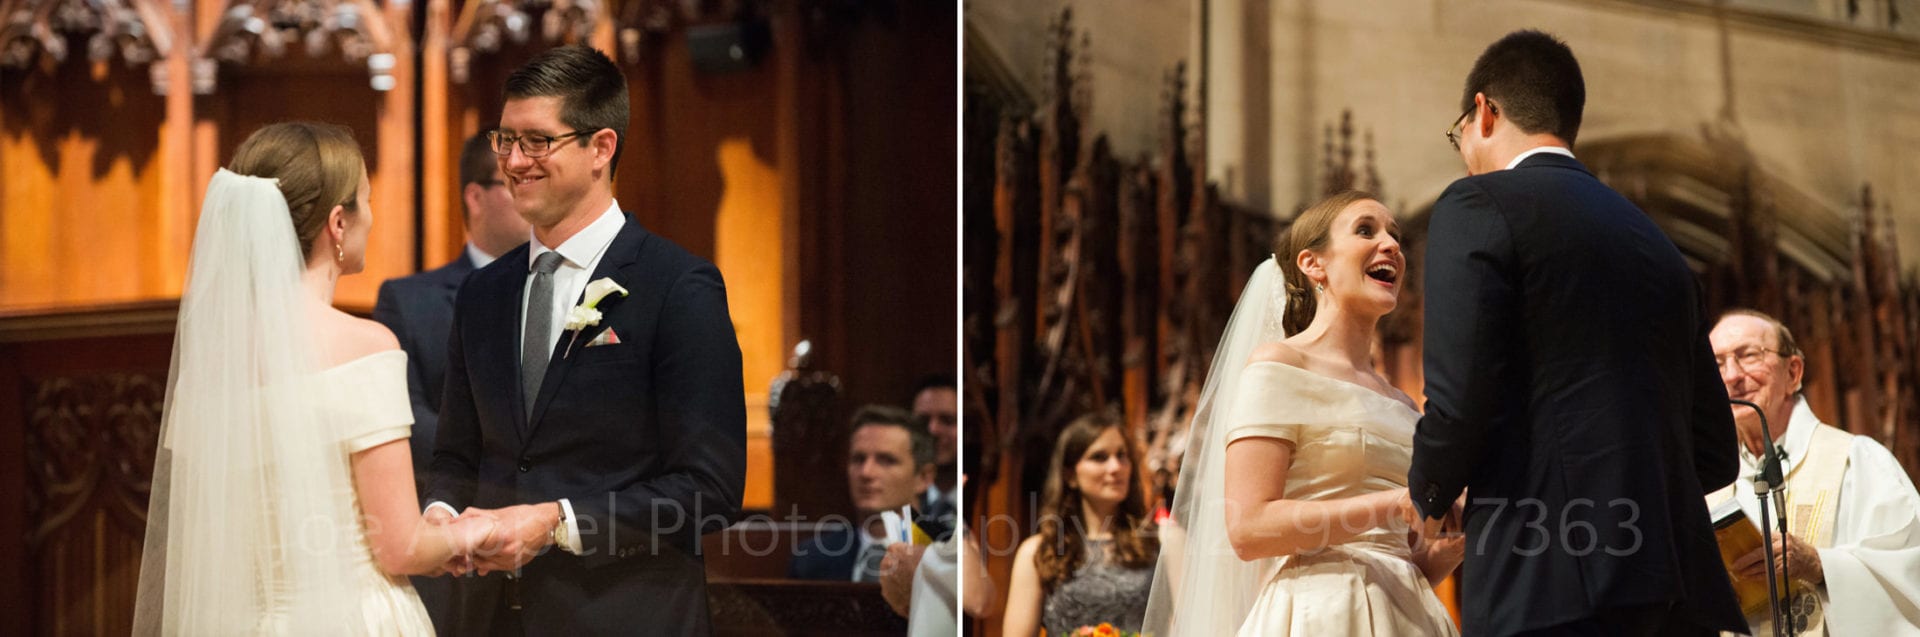 Two photos: one showing a groom facing his bride as they hold hands. He's smiling. The second photo shows the bride looking at her groom with a broad smile as they exchange vows during their Heinz Chapel Wedding. 